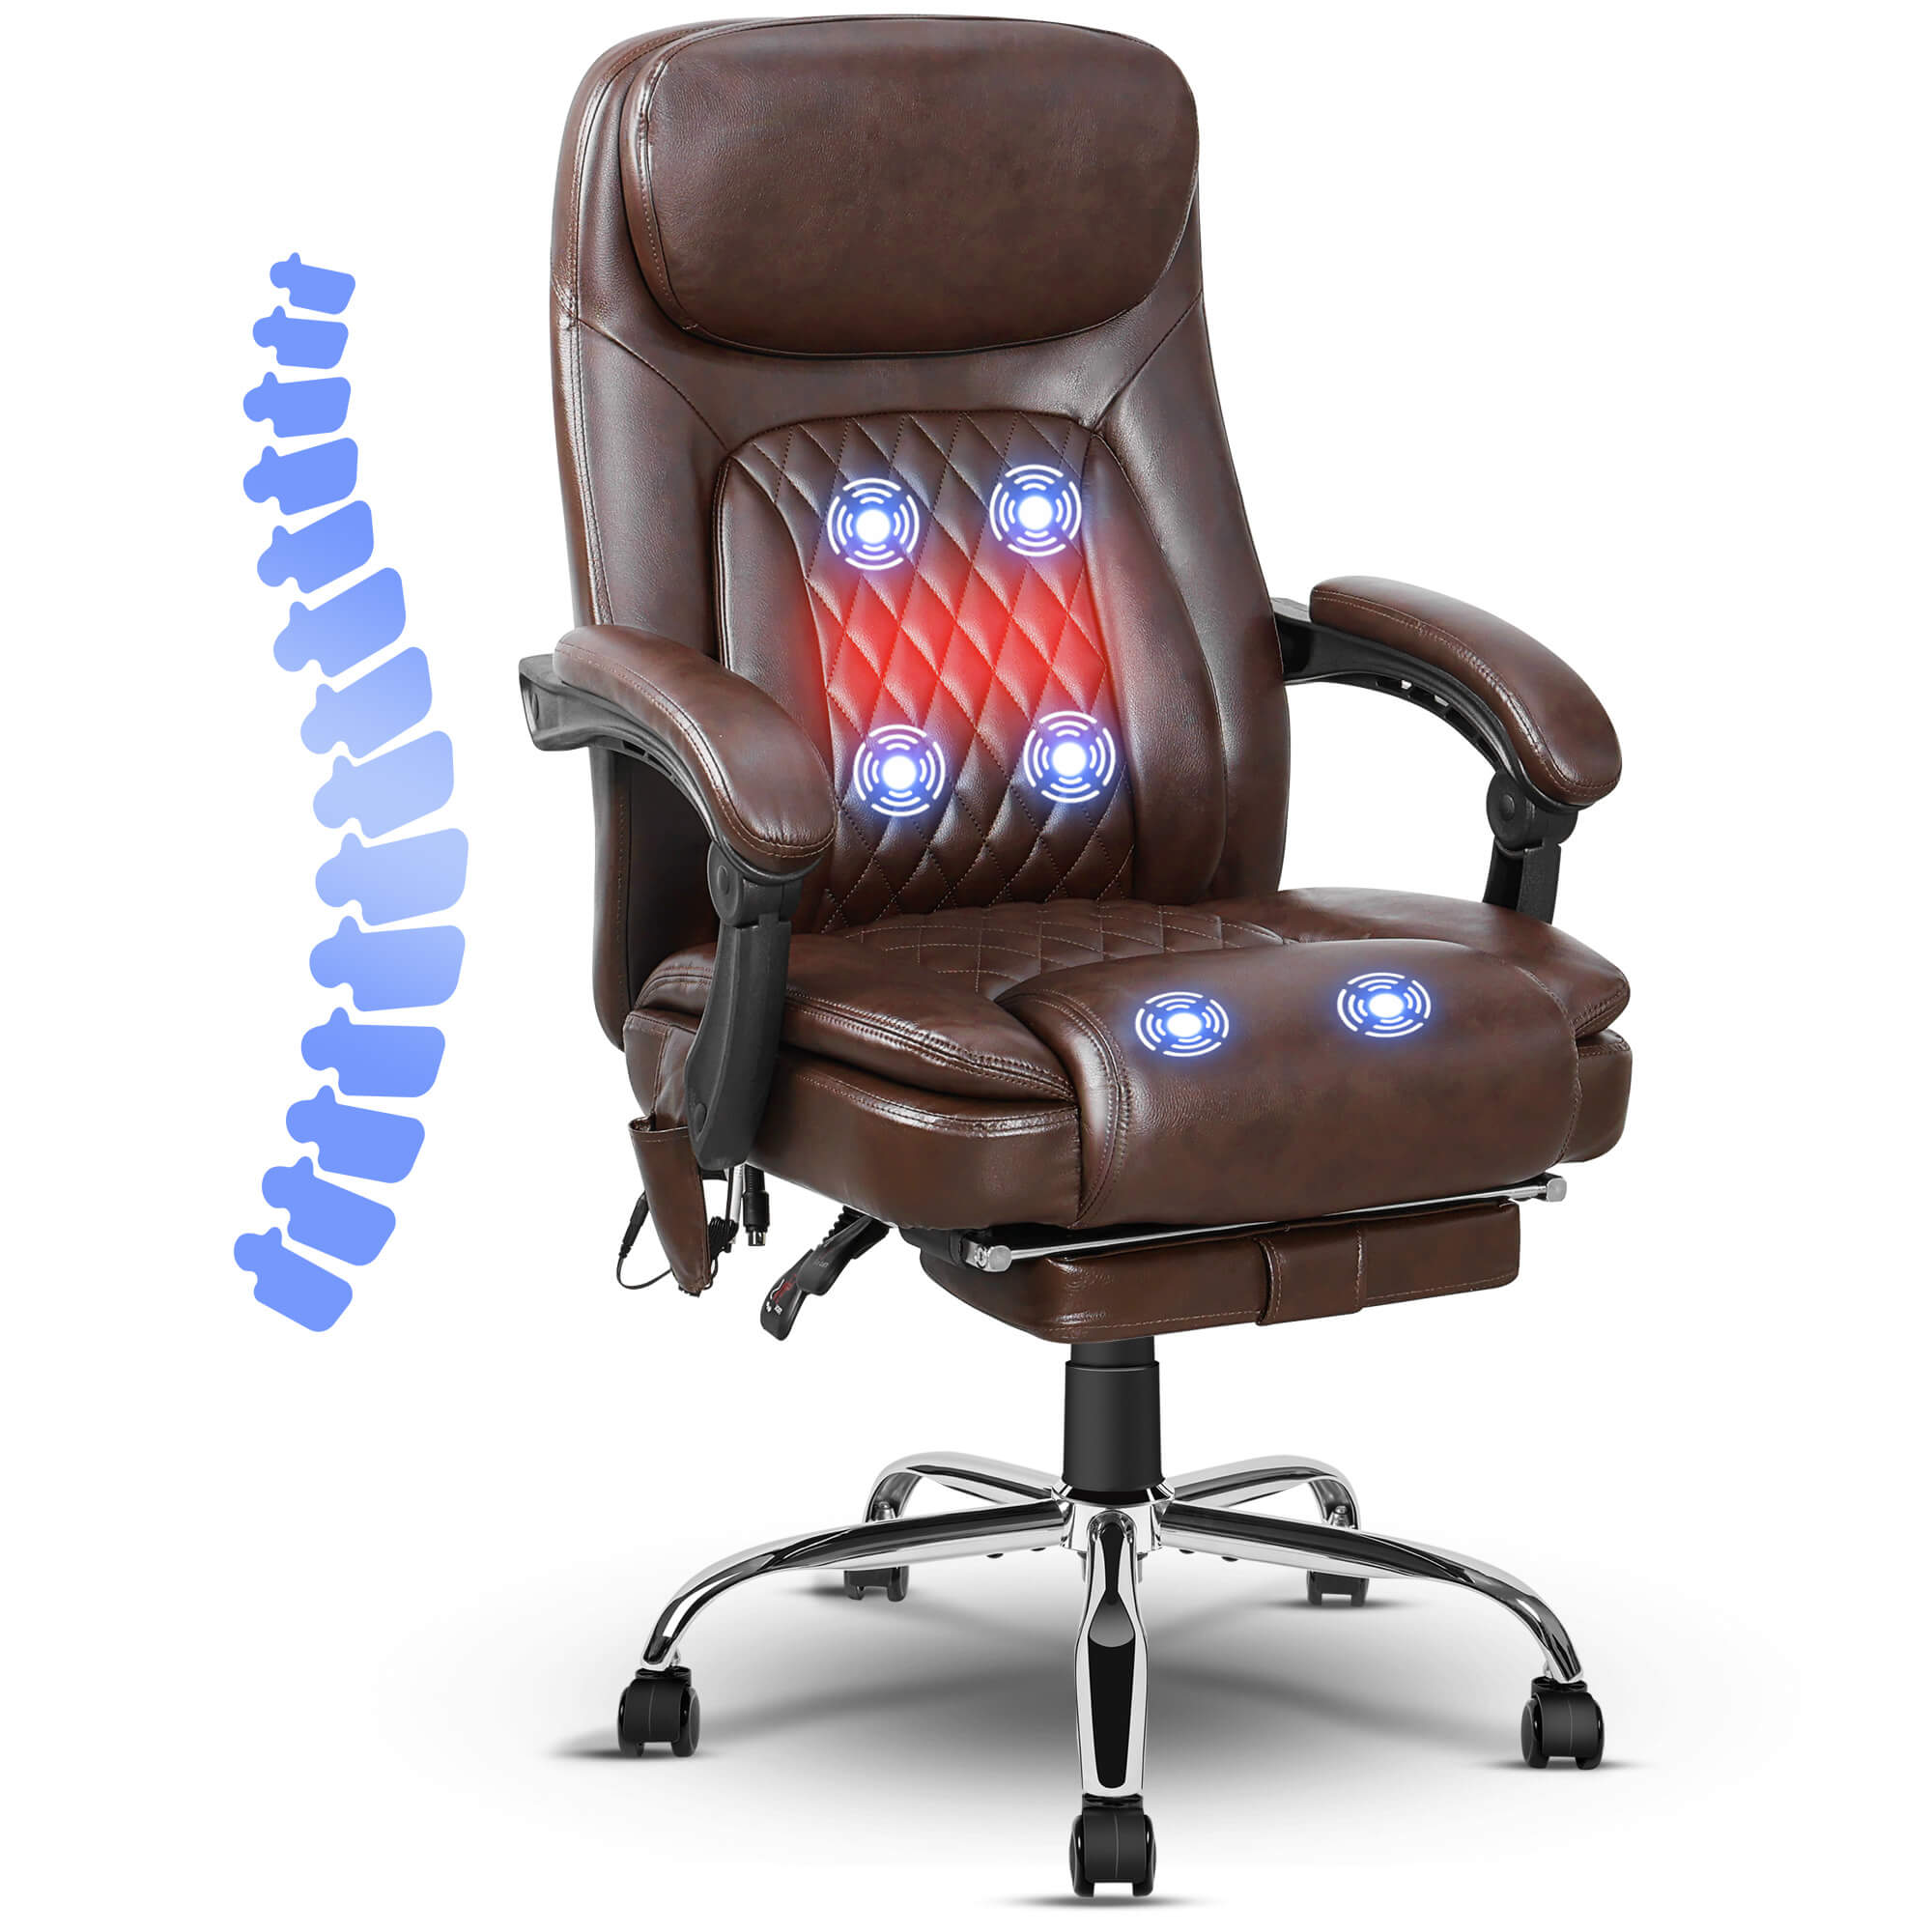 6-Point Massage Office Chairs with Heating, Reclining Backrest, Retractable Footrest, Brown